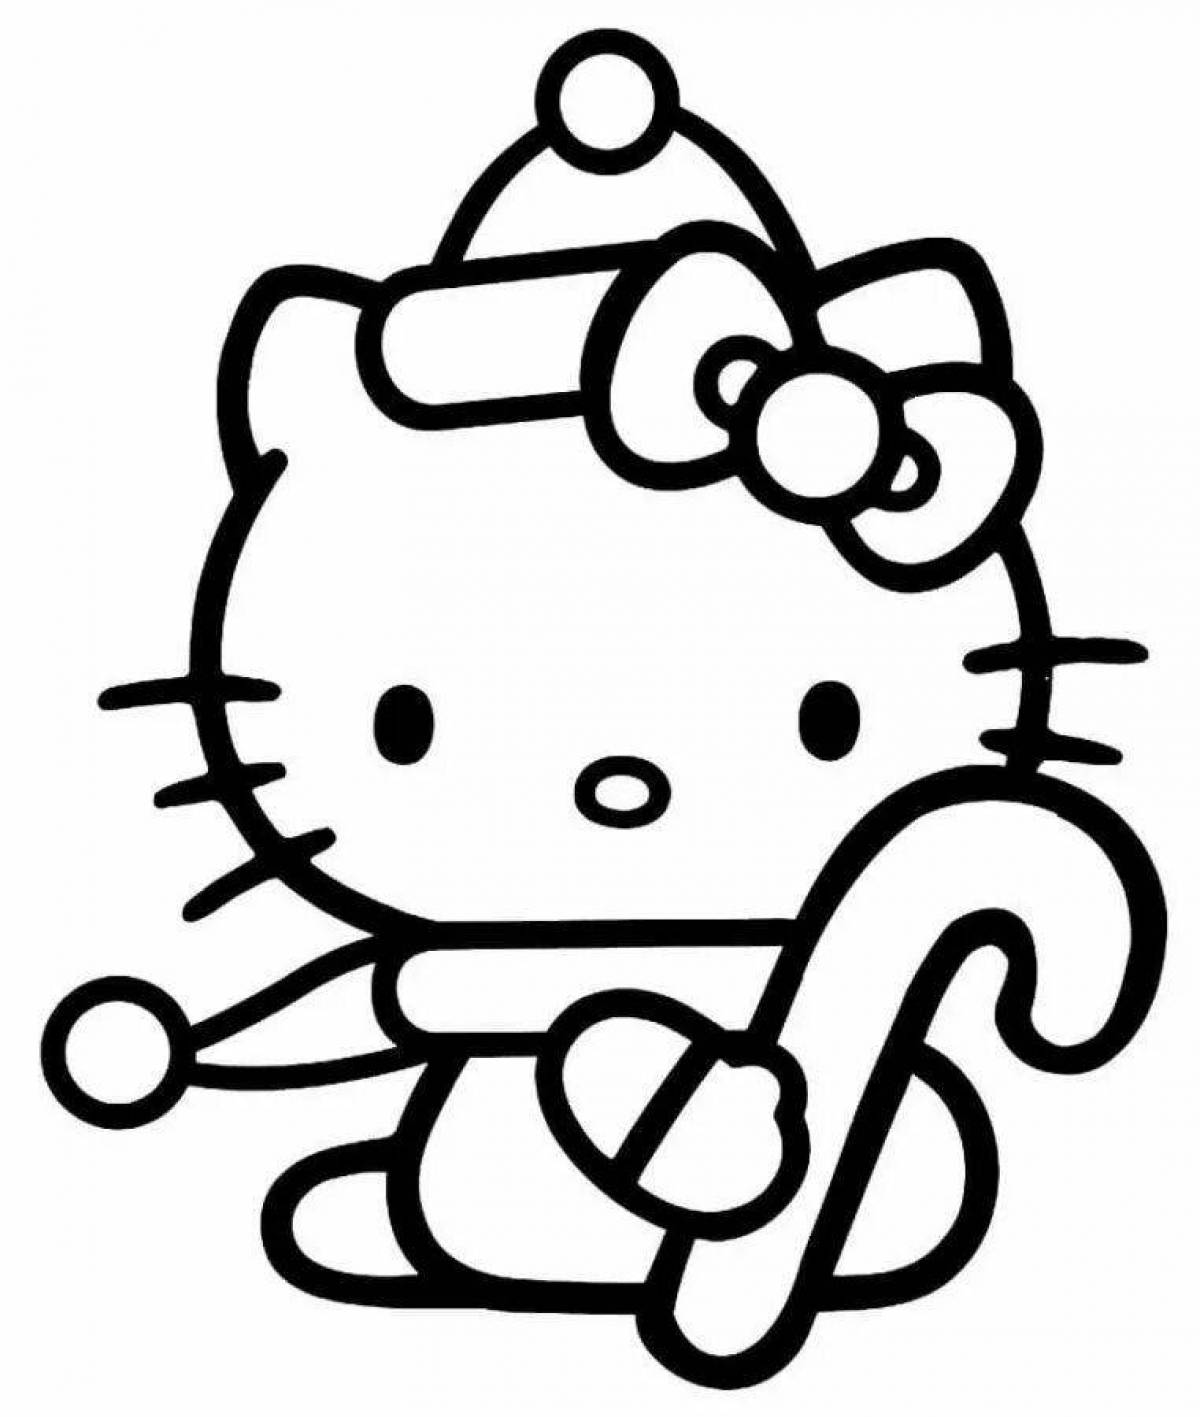 Hello kitty merry christmas coloring book